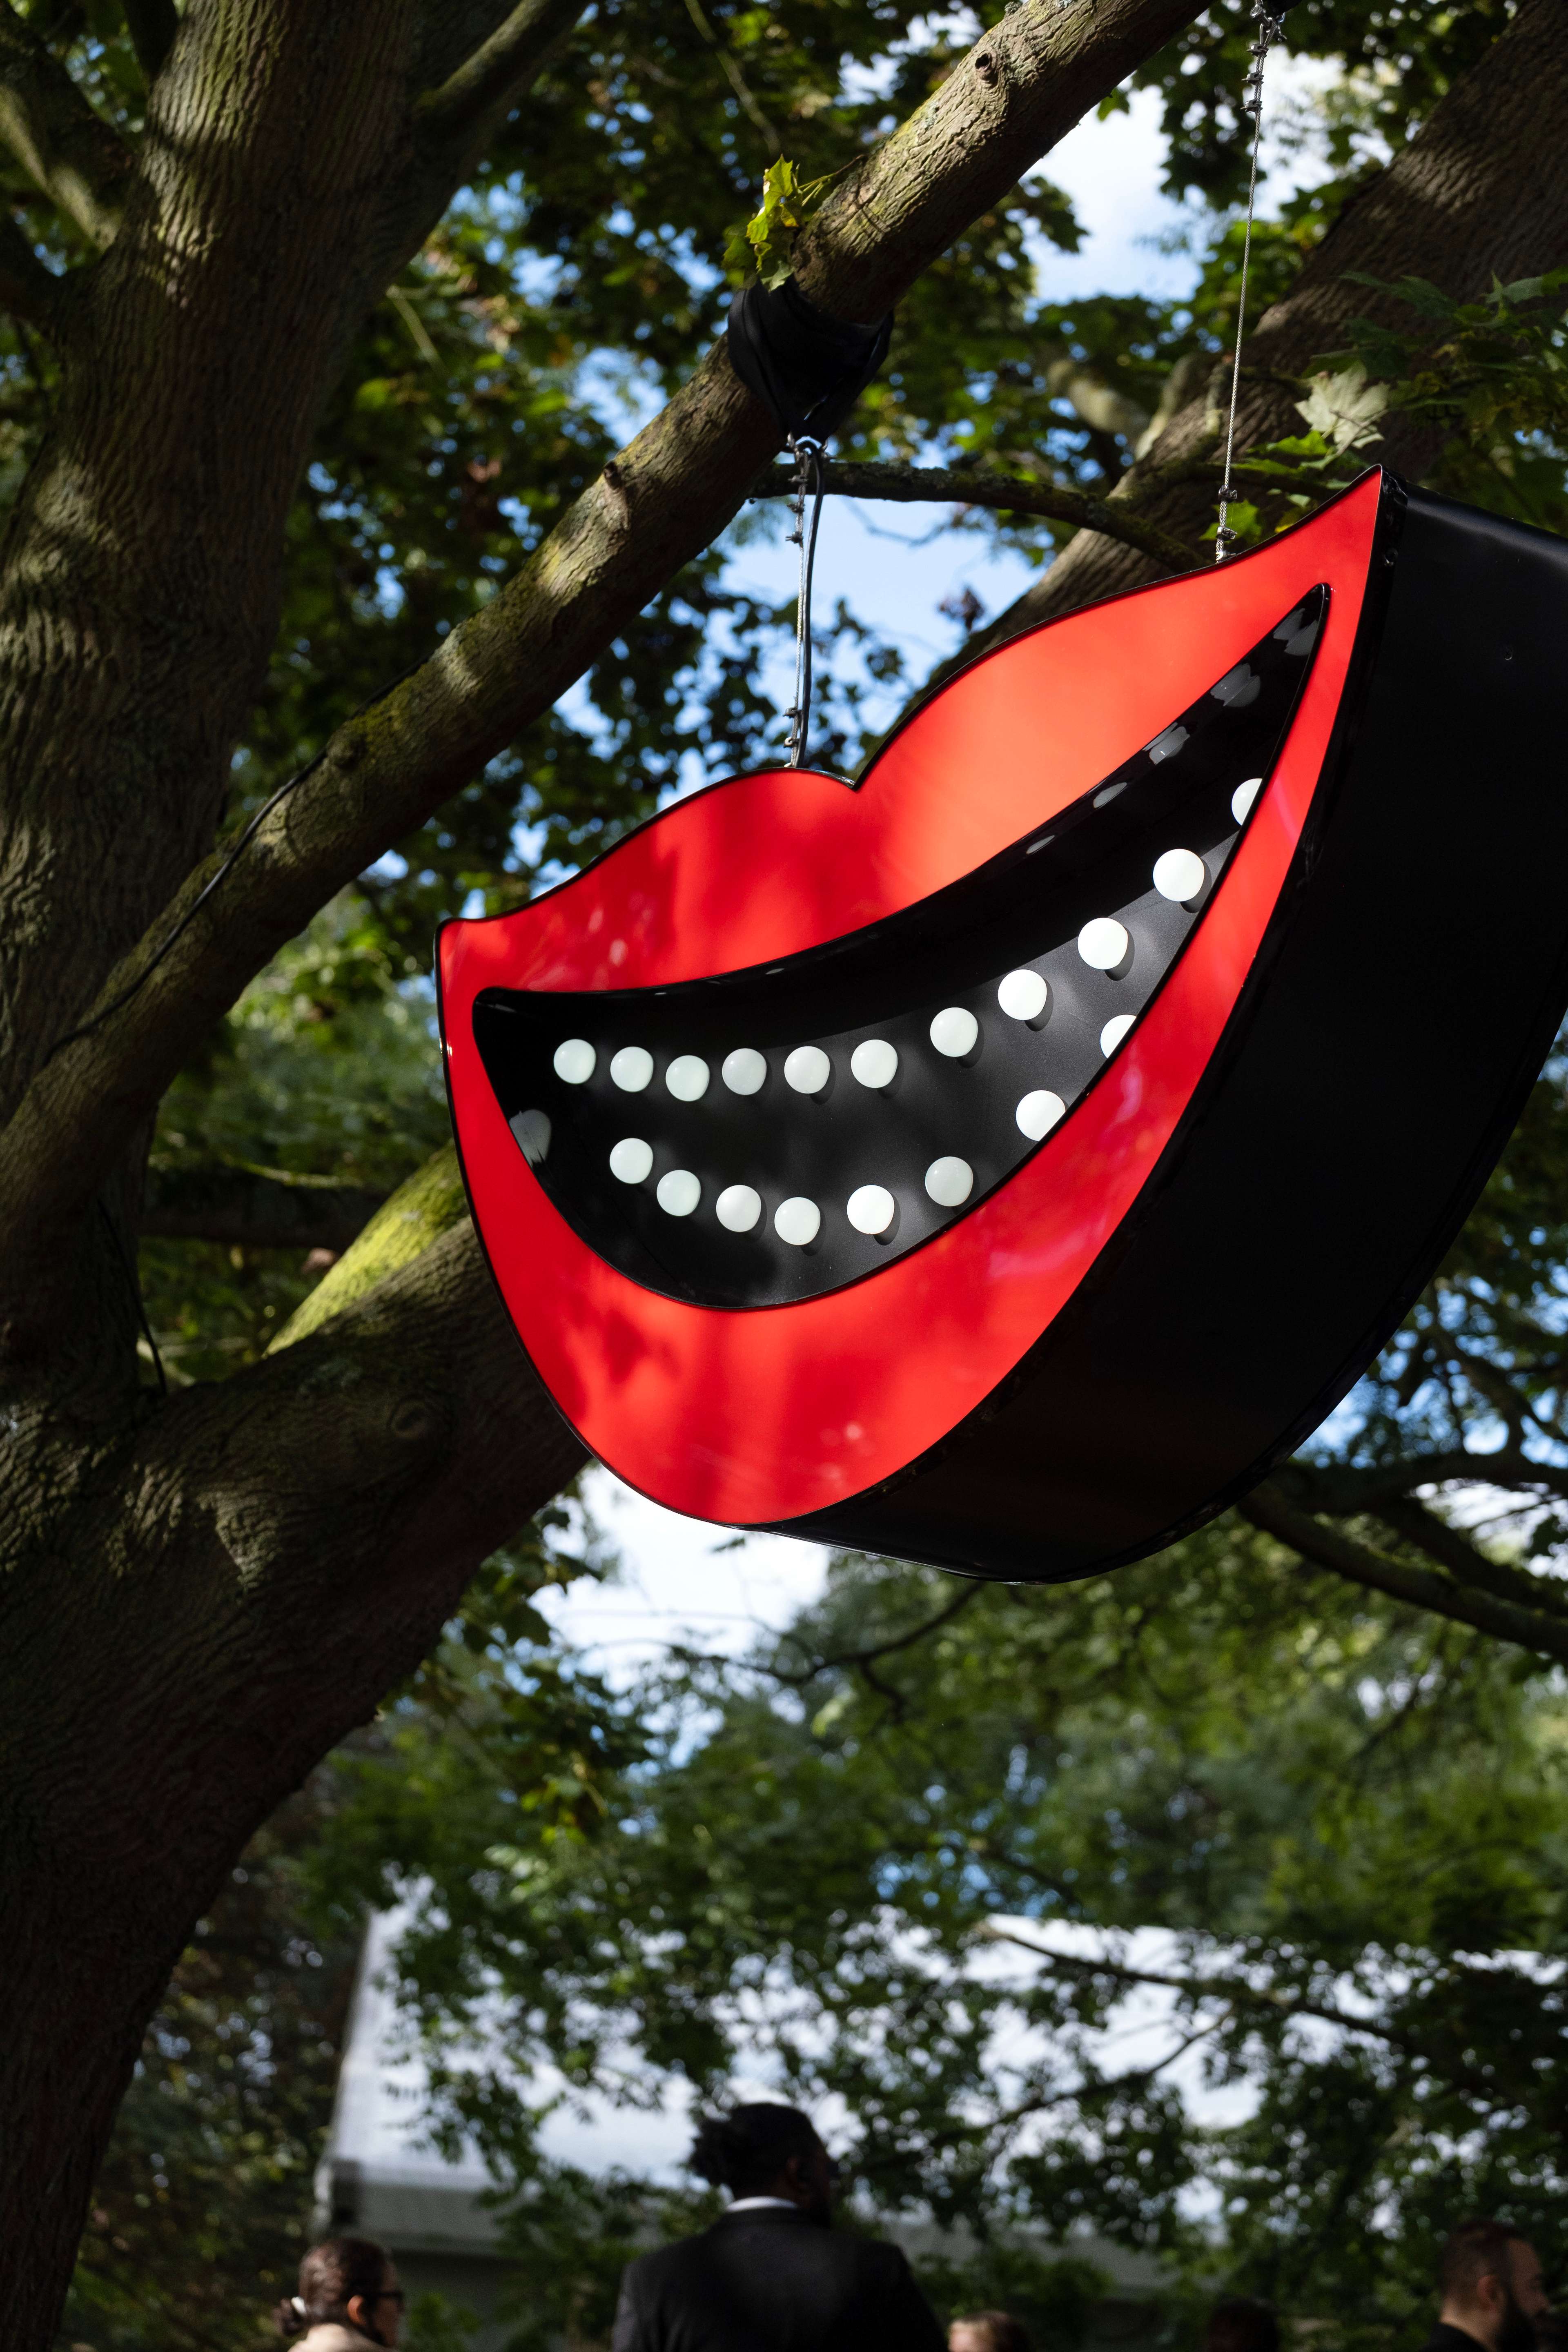 Large-scale artwork: Smiling mouth with white lights as teeth, installed in a tree at Frieze Art Fair, London 2023.